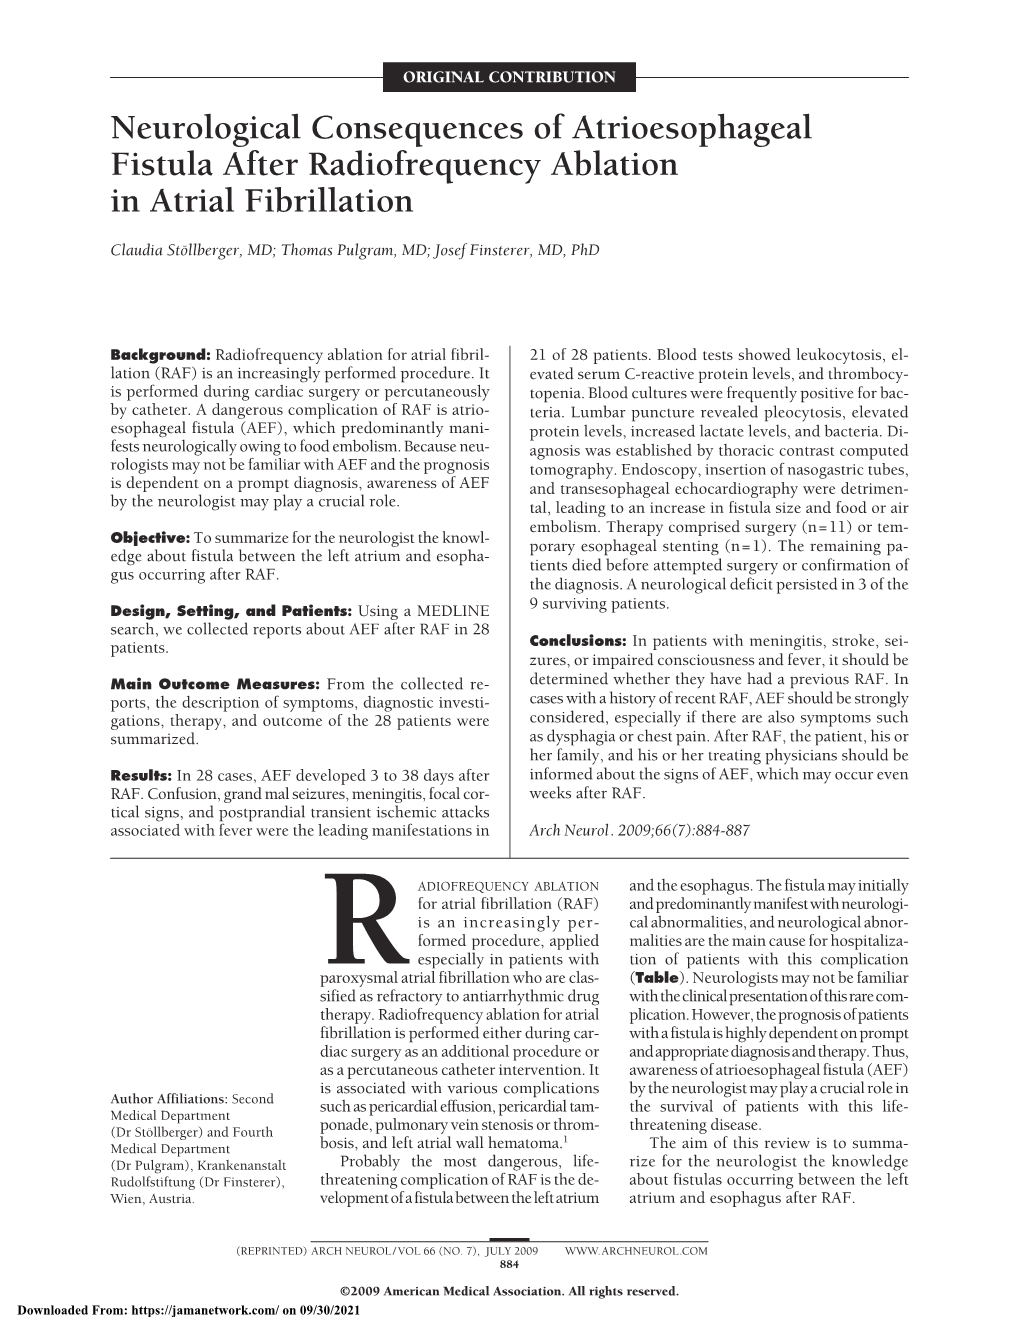 Neurological Consequences of Atrioesophageal Fistula After Radiofrequency Ablation in Atrial Fibrillation